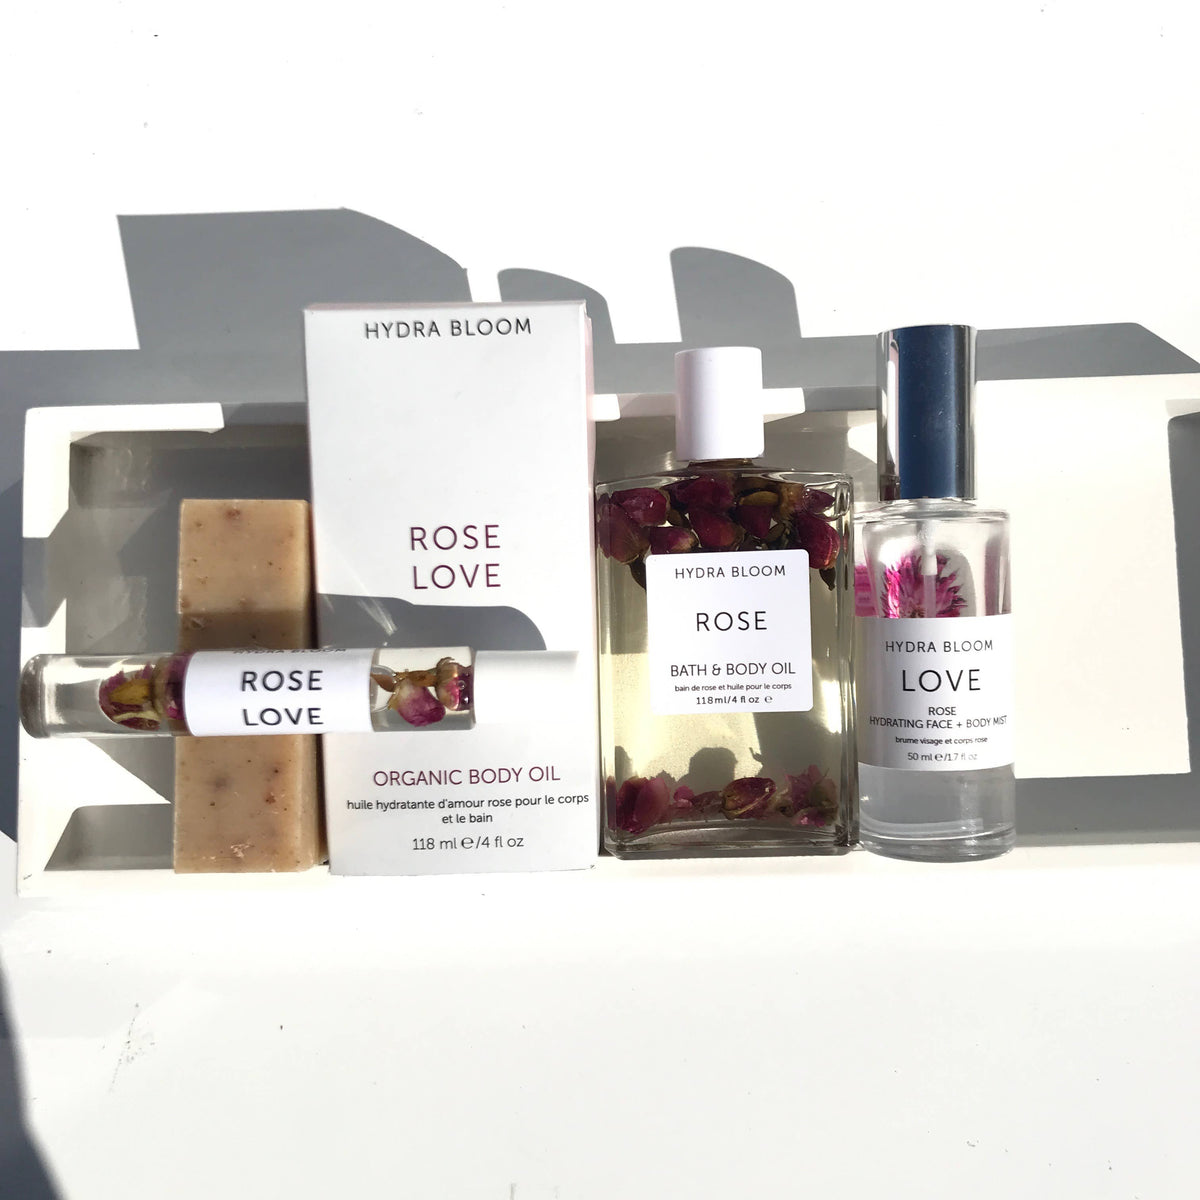 A selection of Hydra Bloom Beauty skincare products, including the Rose Love Essential Perfume Roll-on Oil, bath & body oil, and a soap bar, all arranged neatly with their shadows forming on a white surface.